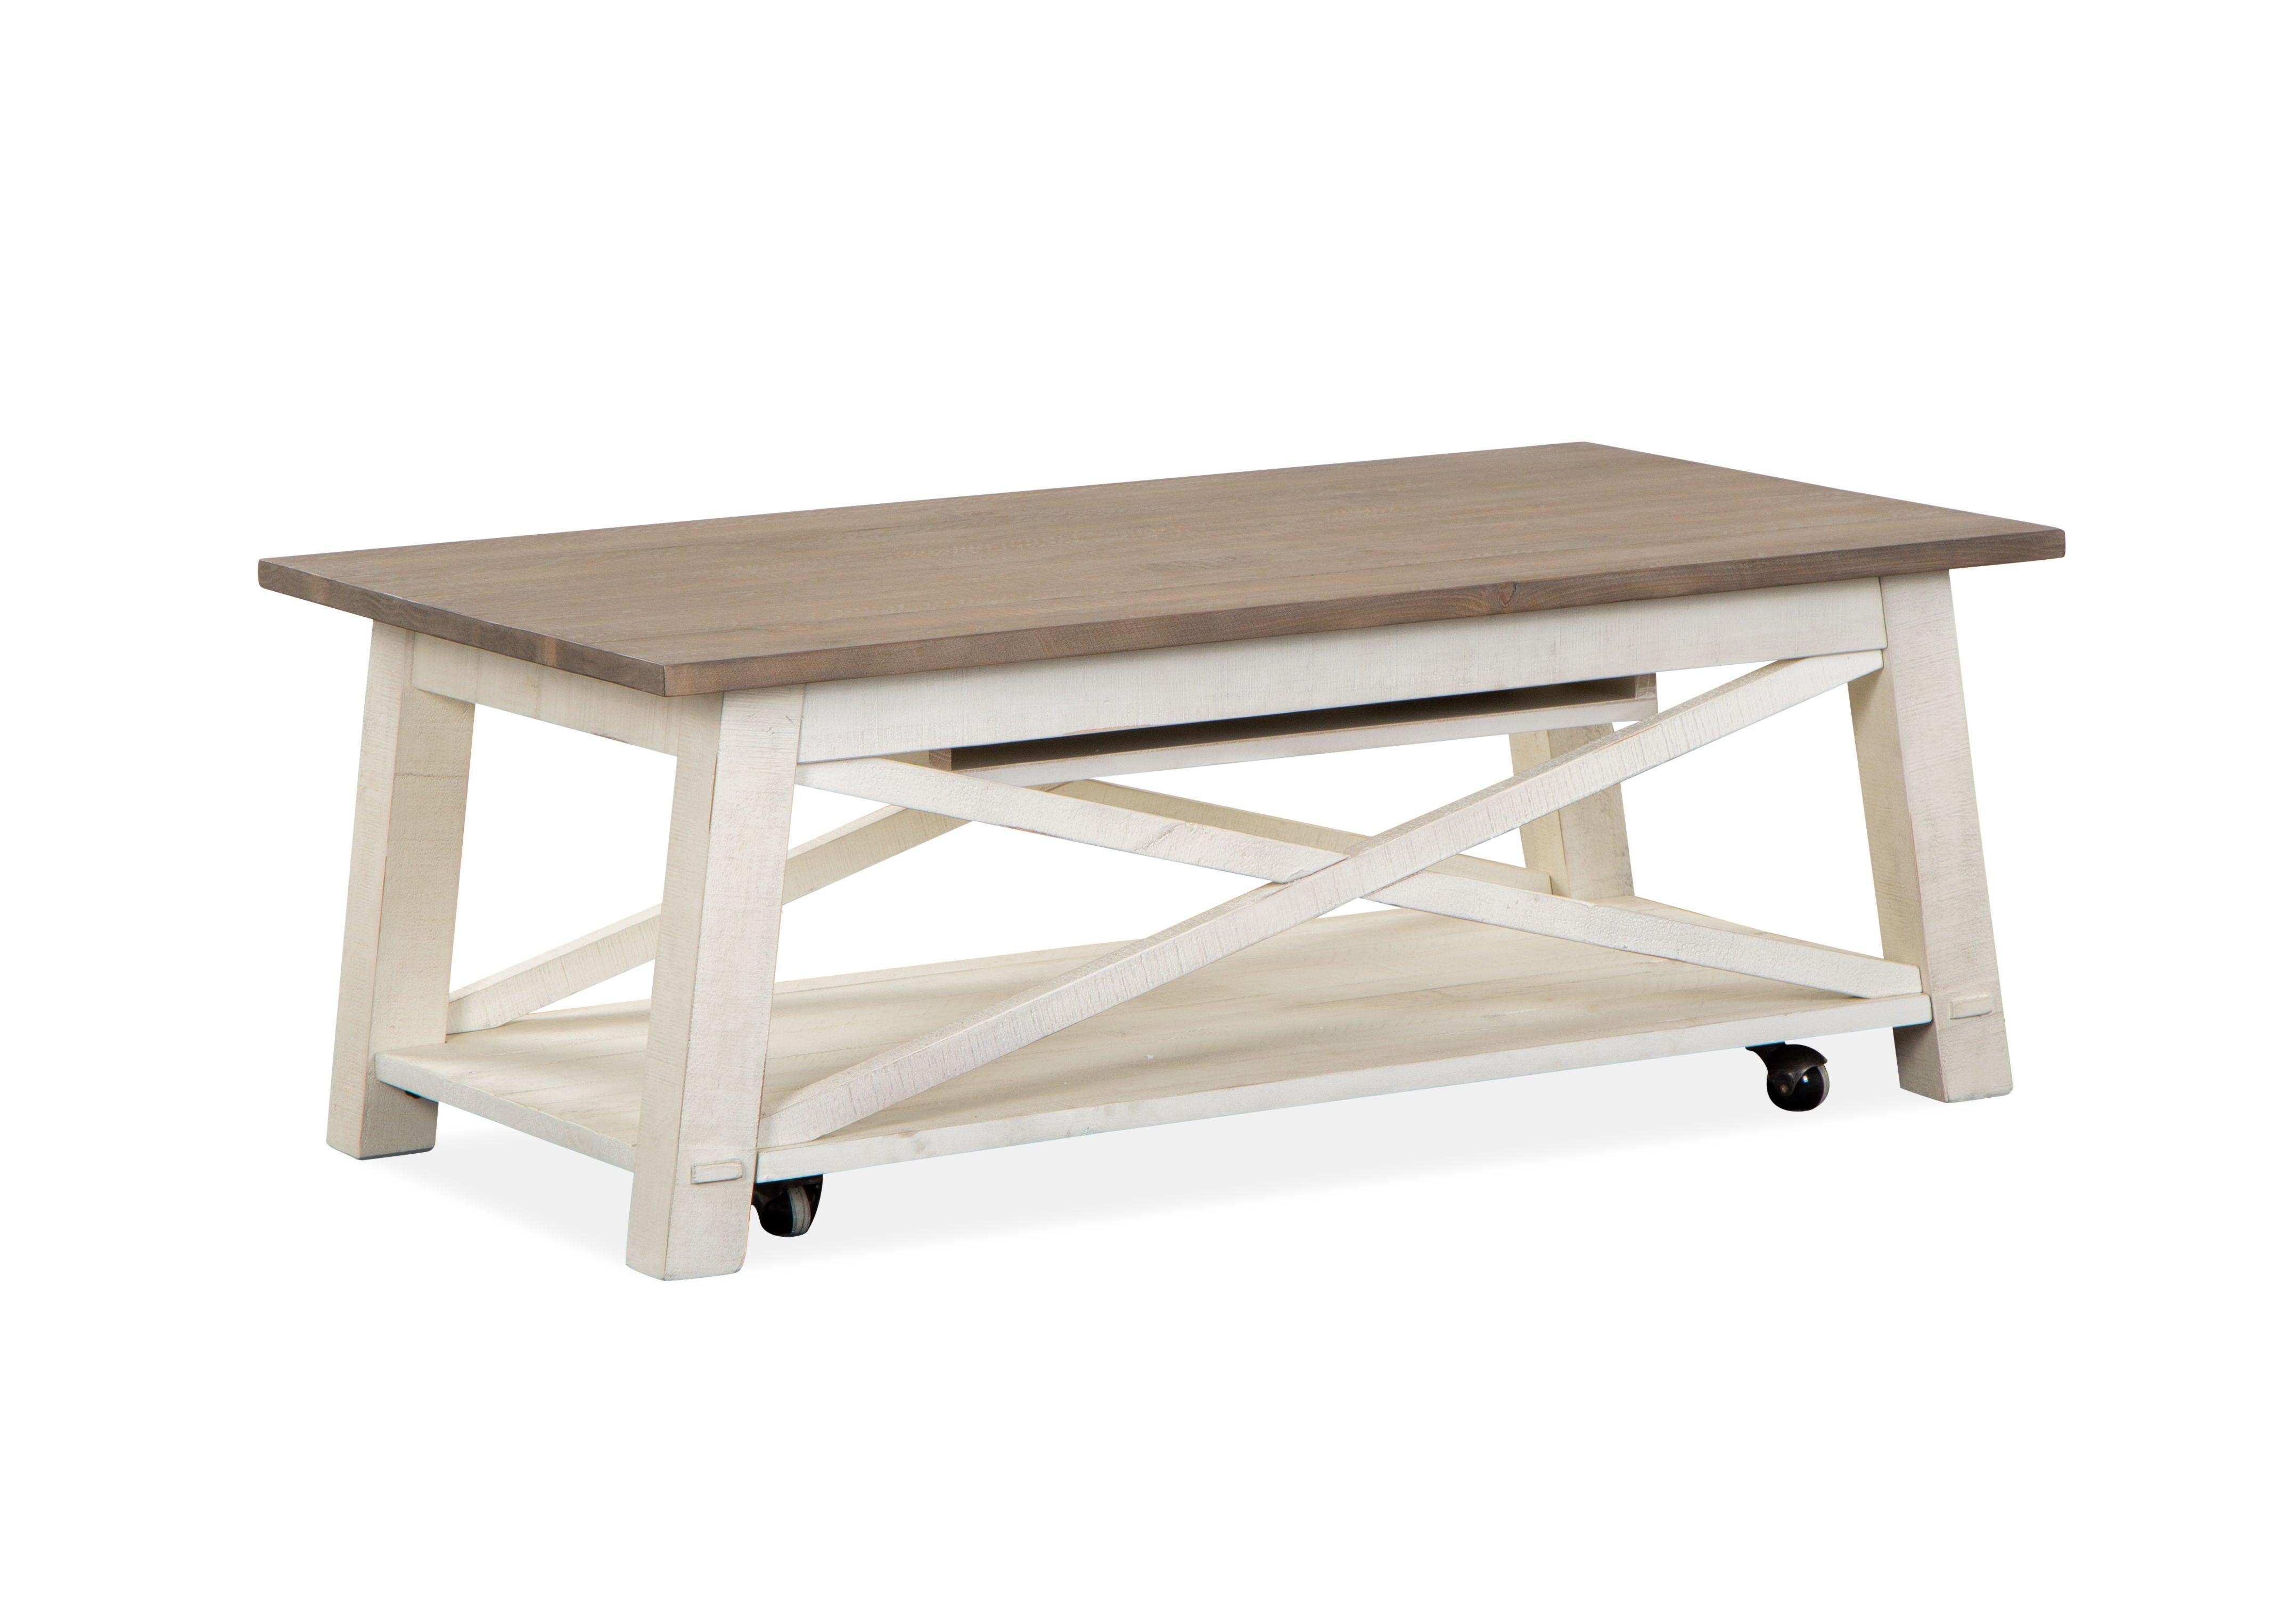 Magnussen Furniture - Sedley - Lift Top Storage Cocktail Table (With Casters) - Distressed Chalk White - 5th Avenue Furniture